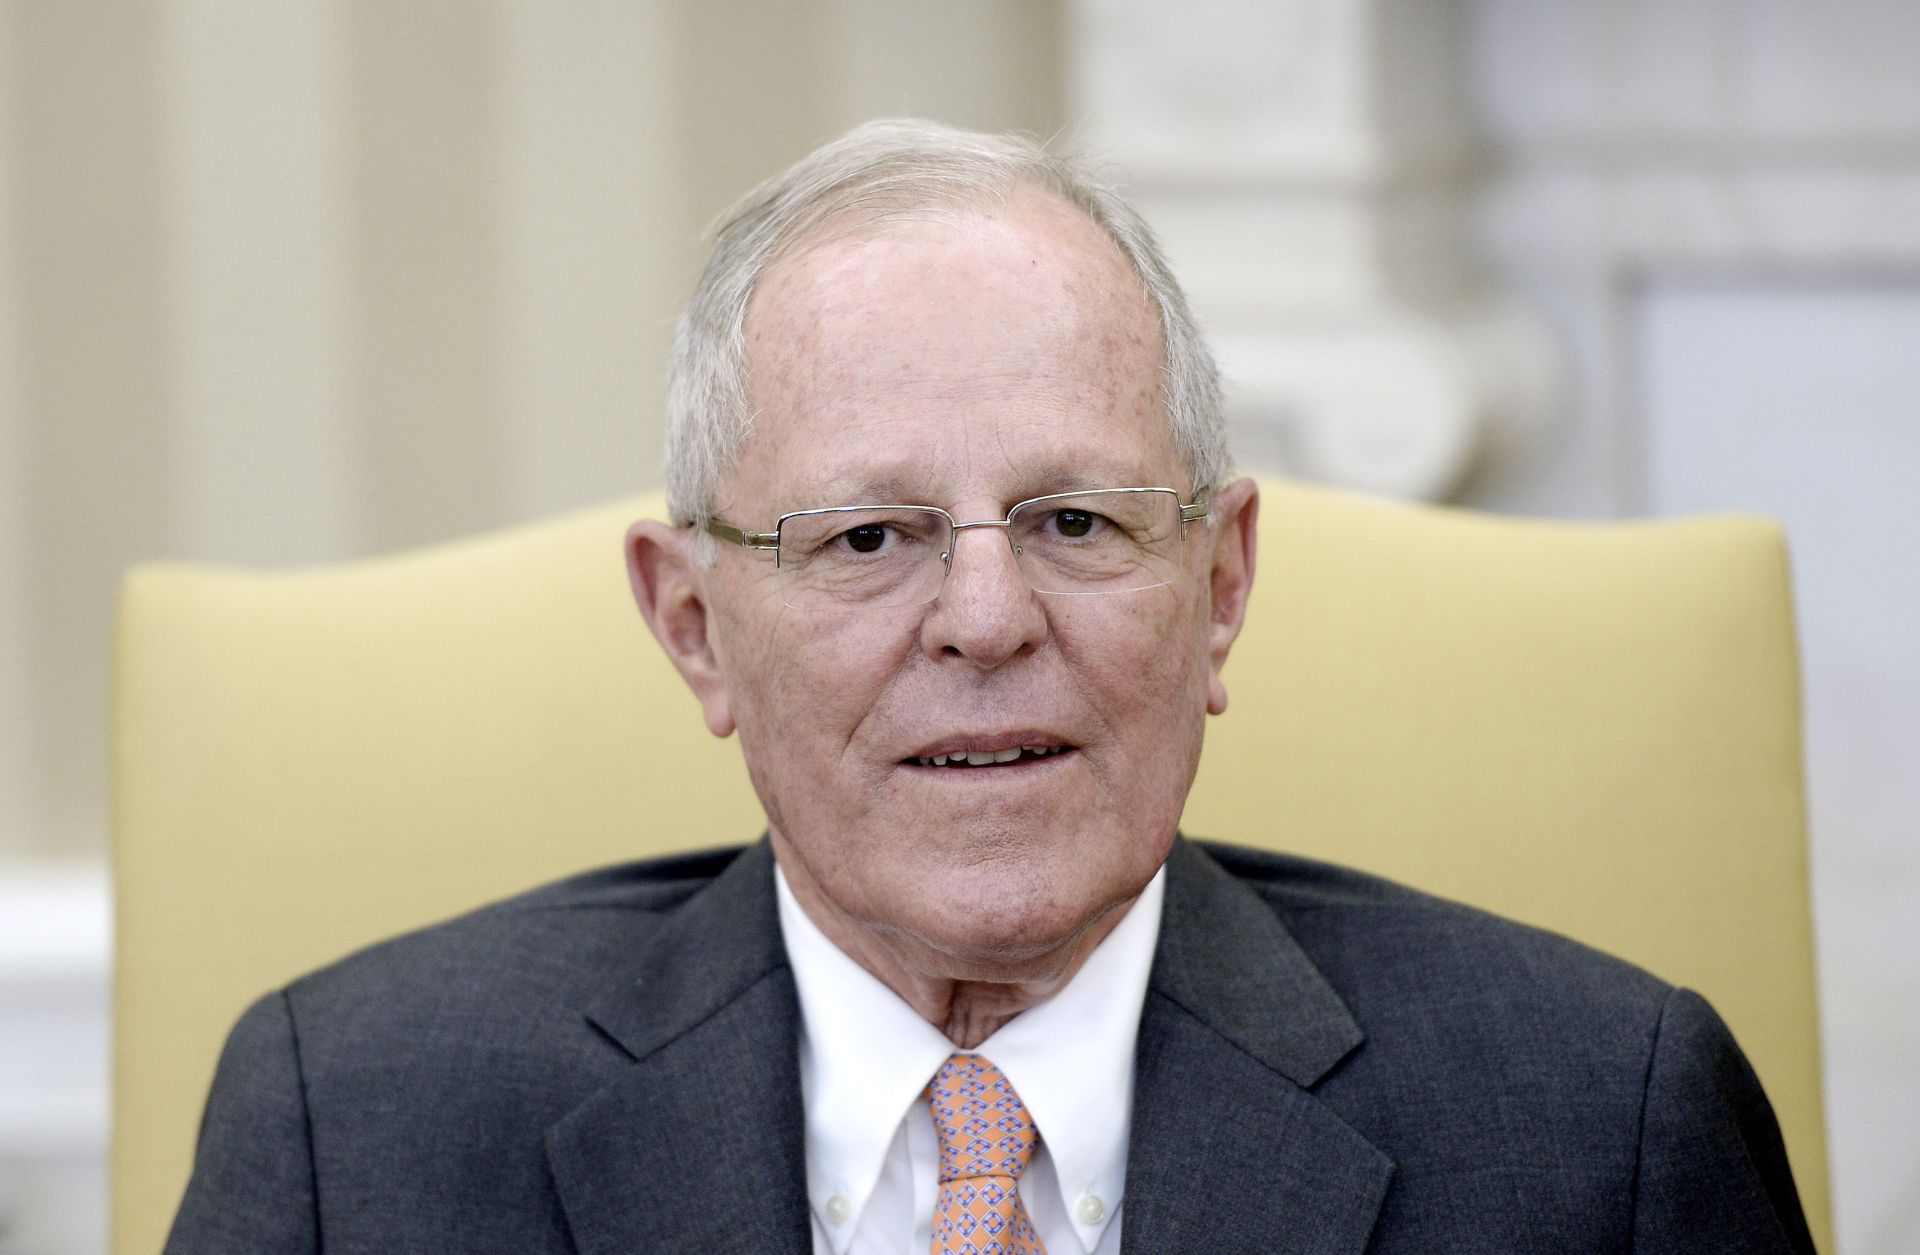 Peruvian President Pedro Pablo Kuczynski sits in the Oval Office of the White House during a meeting with U.S. President Donald Trump in February 2017.